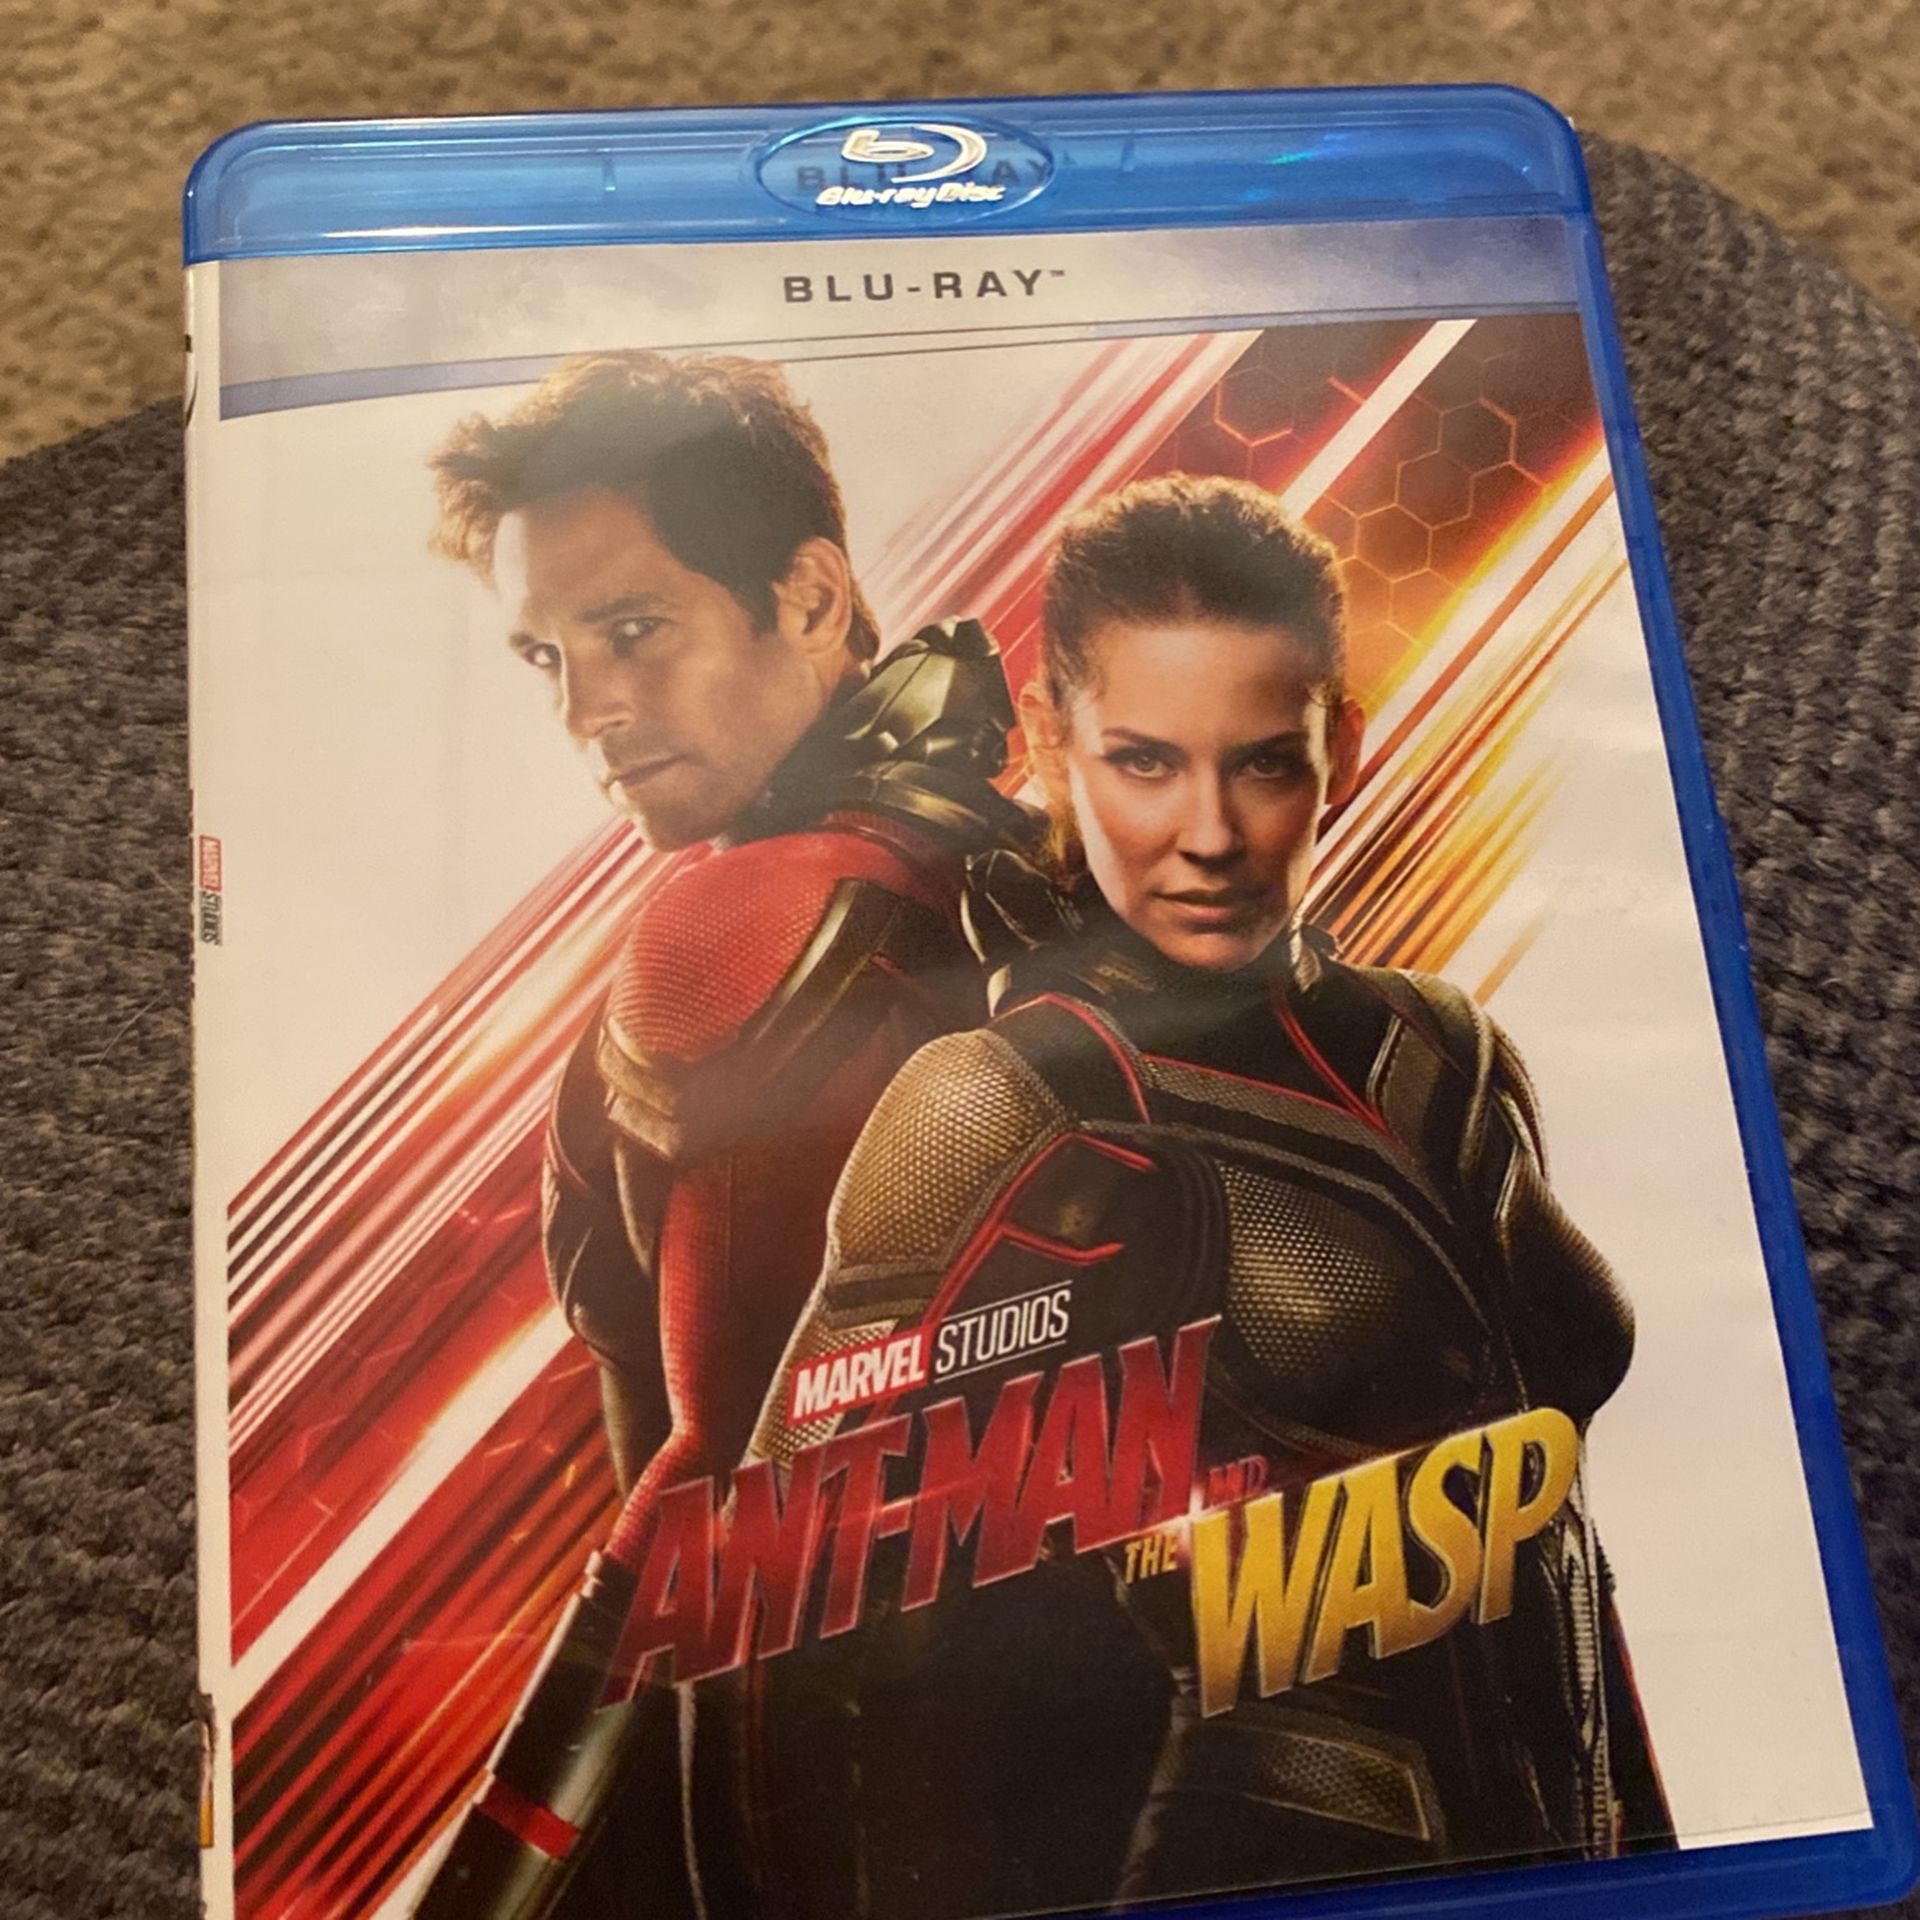 Ant man And Wasp Blu-ray 